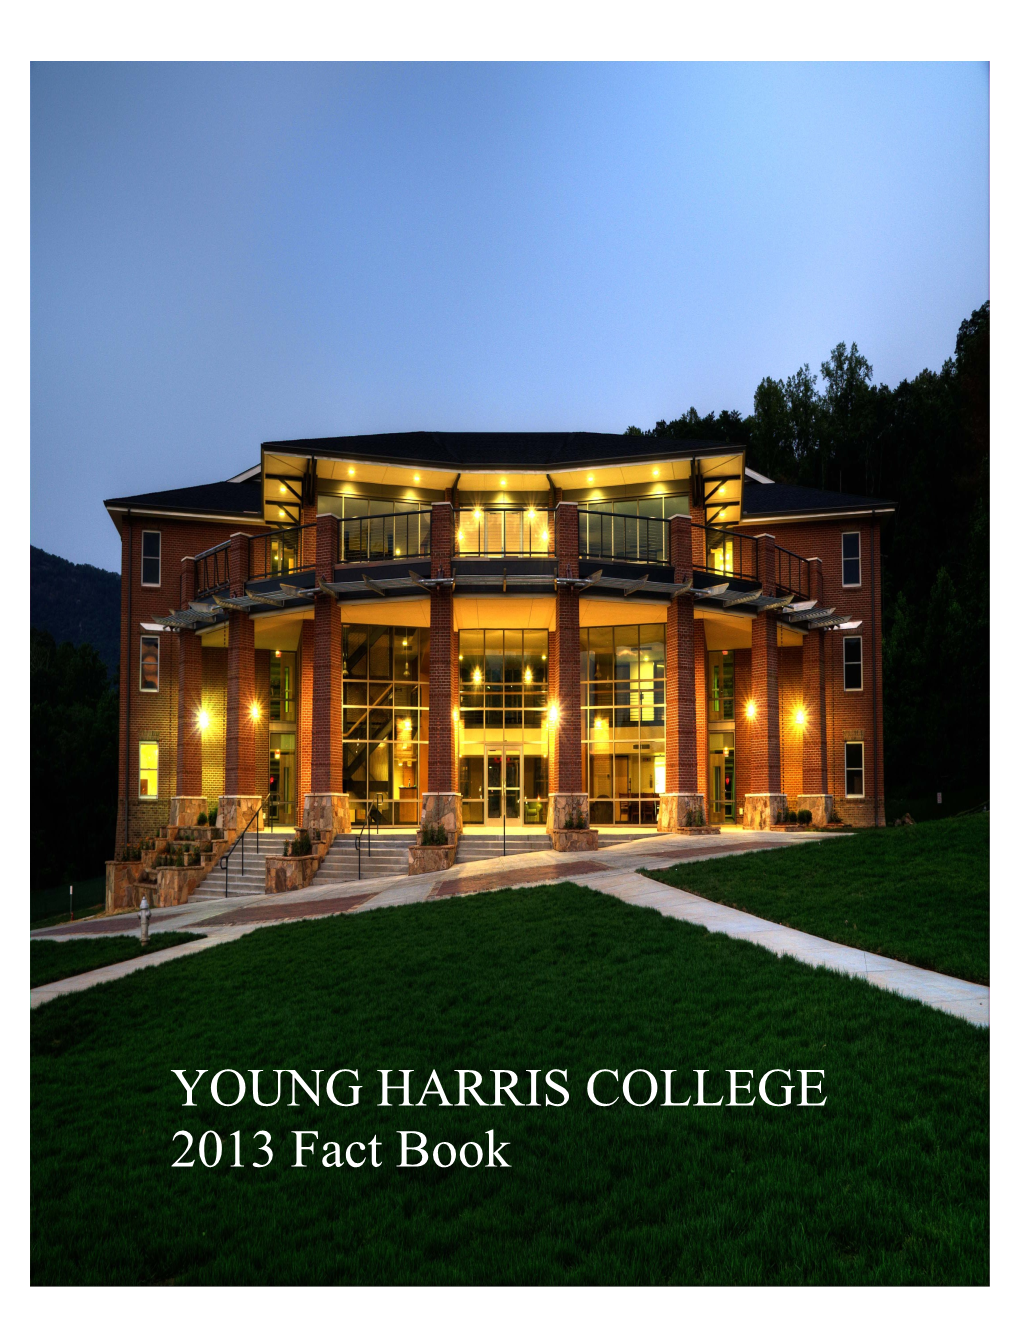 YOUNG HARRIS COLLEGE 2013 Fact Book